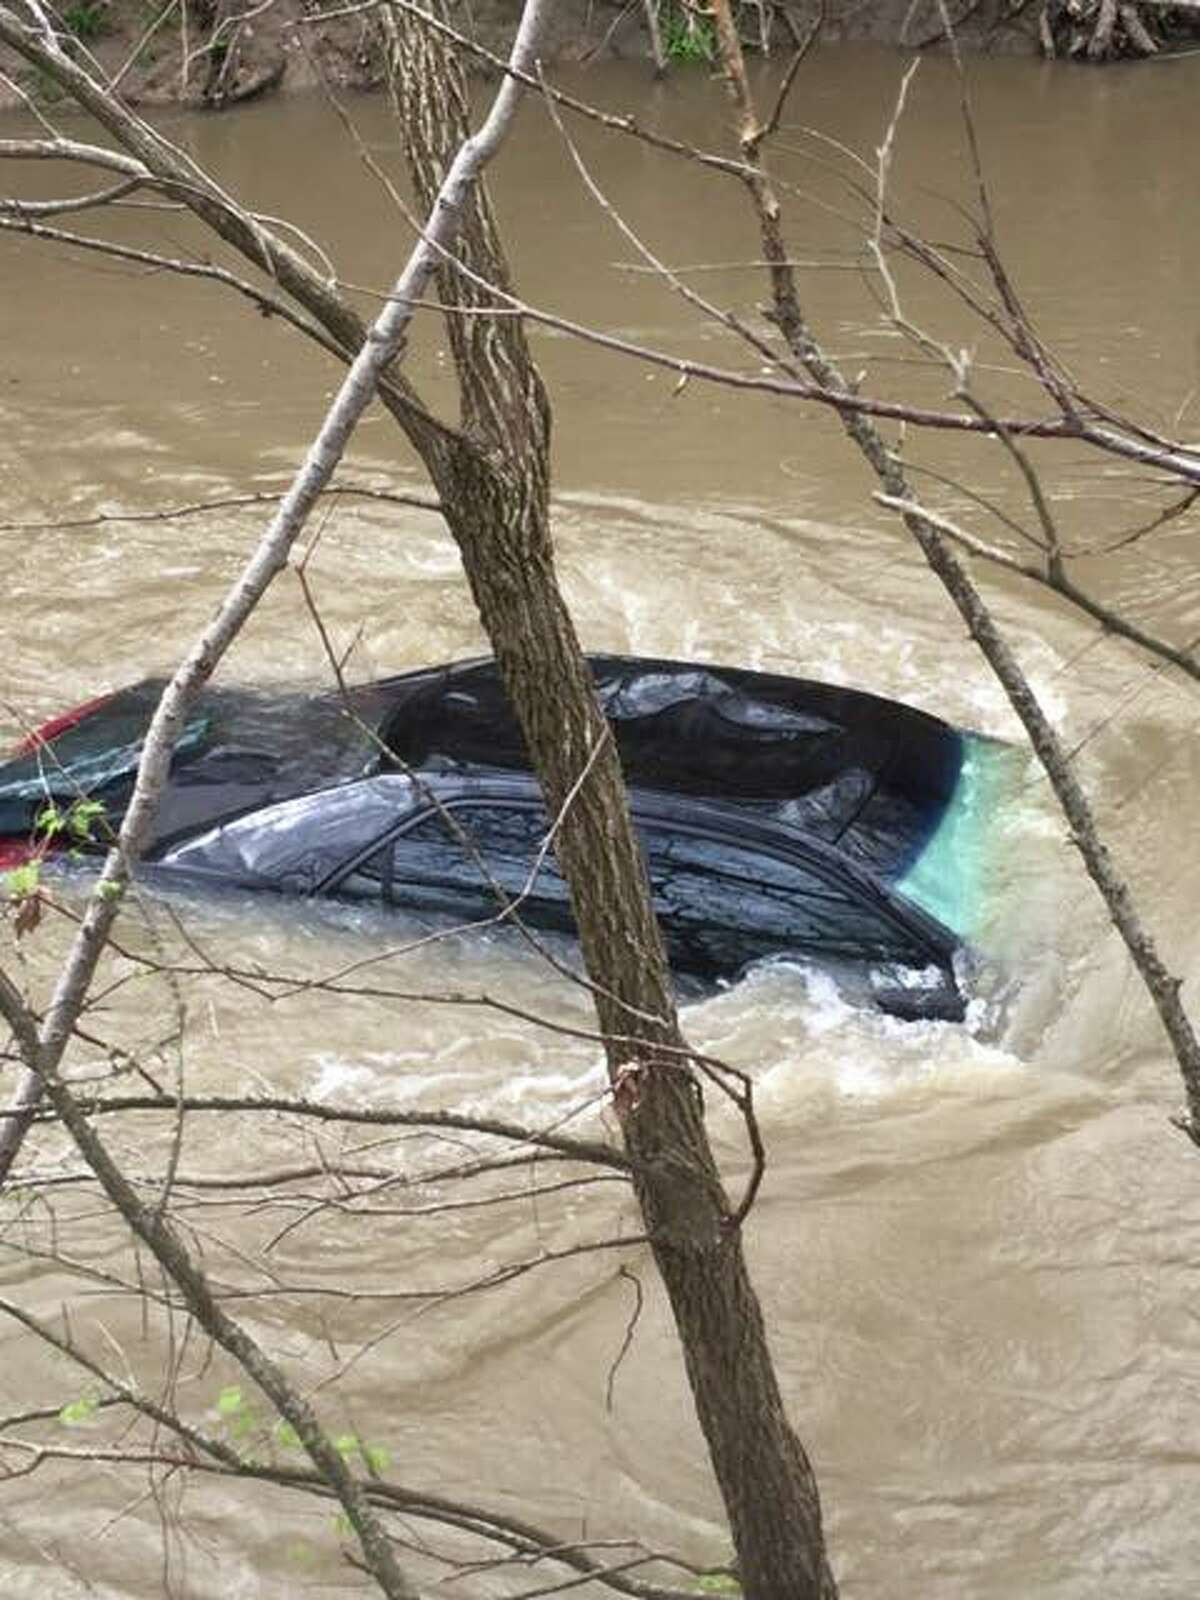 New Berlin Volunteer Fire Department rescued a woman from Cibolo Creek Sunday afternoon, March 5, 2017. A Texas Parks & Wildlife Department Facebook post reported the vehicle and woman floated 500 yards down Cibolo Creek after being swept off the road.